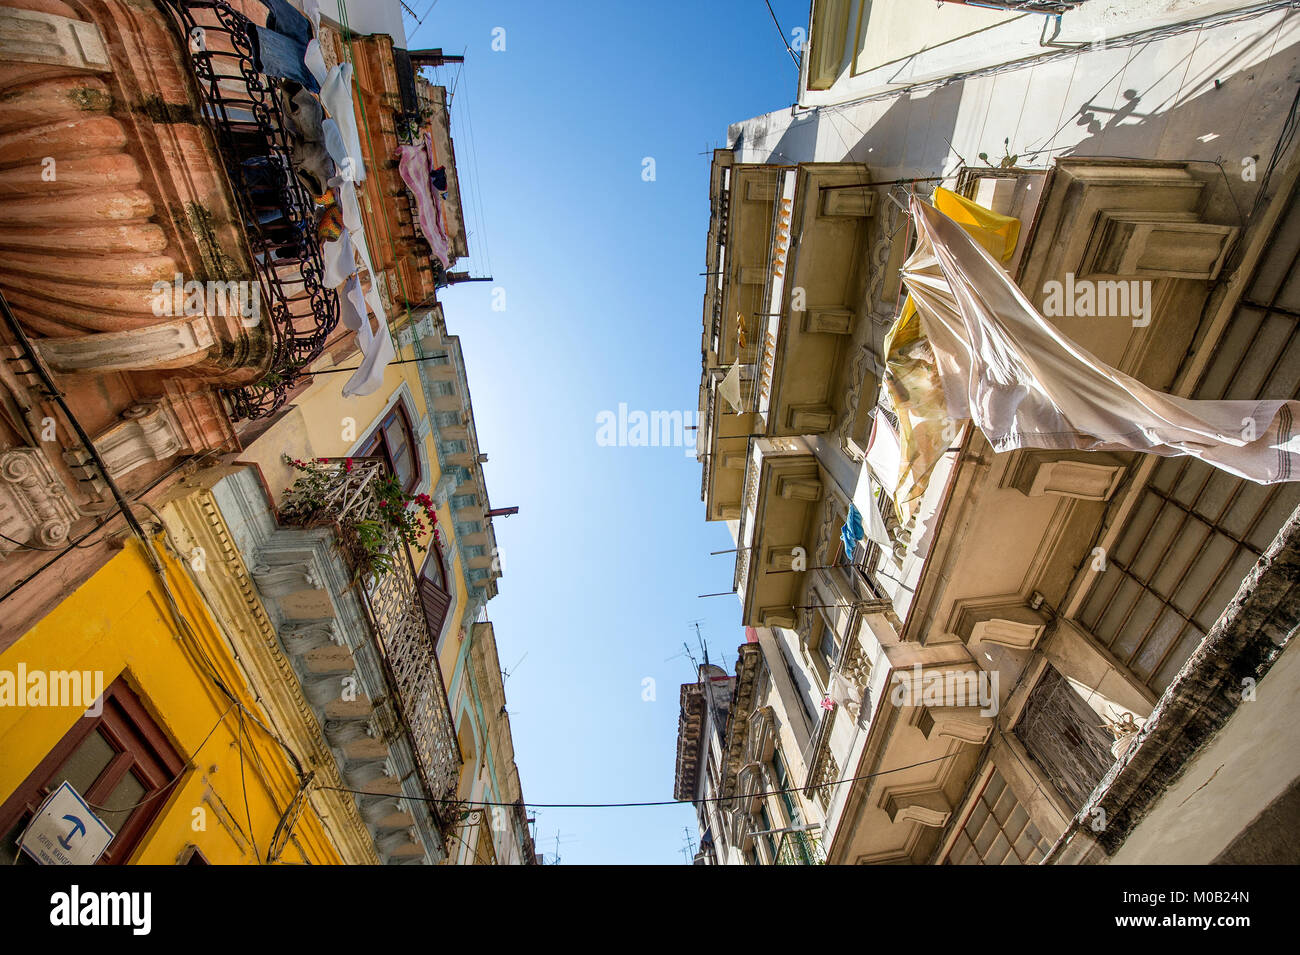 View up from the street on walls and a roofs of the building on the streets of Havana Cuba Stock Photo